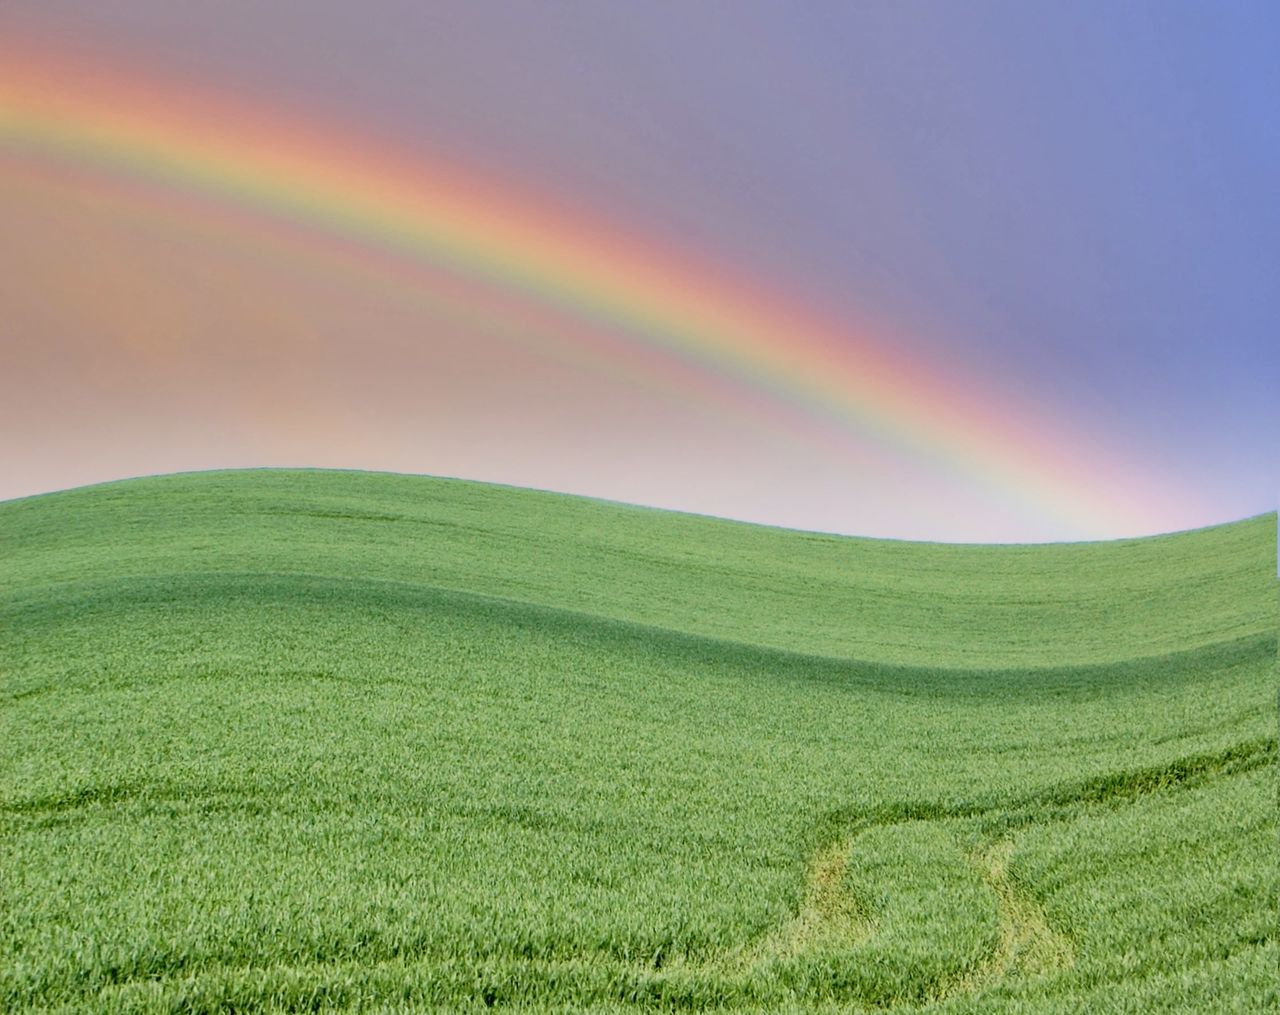 SCENIC VIEW OF RAINBOW OVER GREEN LANDSCAPE